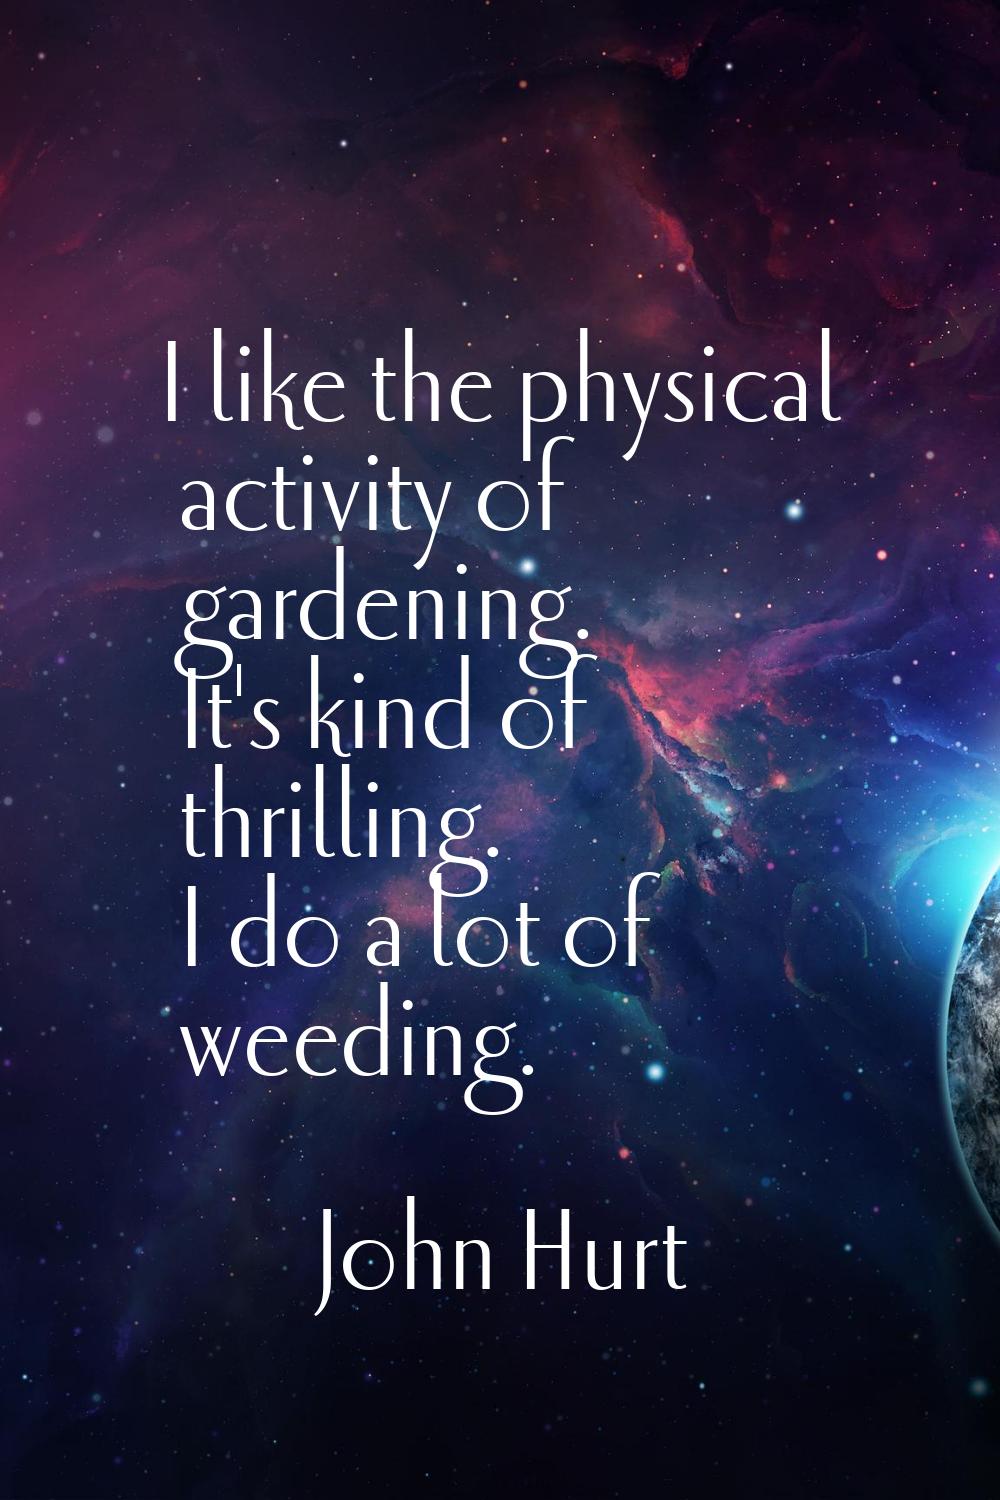 I like the physical activity of gardening. It's kind of thrilling. I do a lot of weeding.